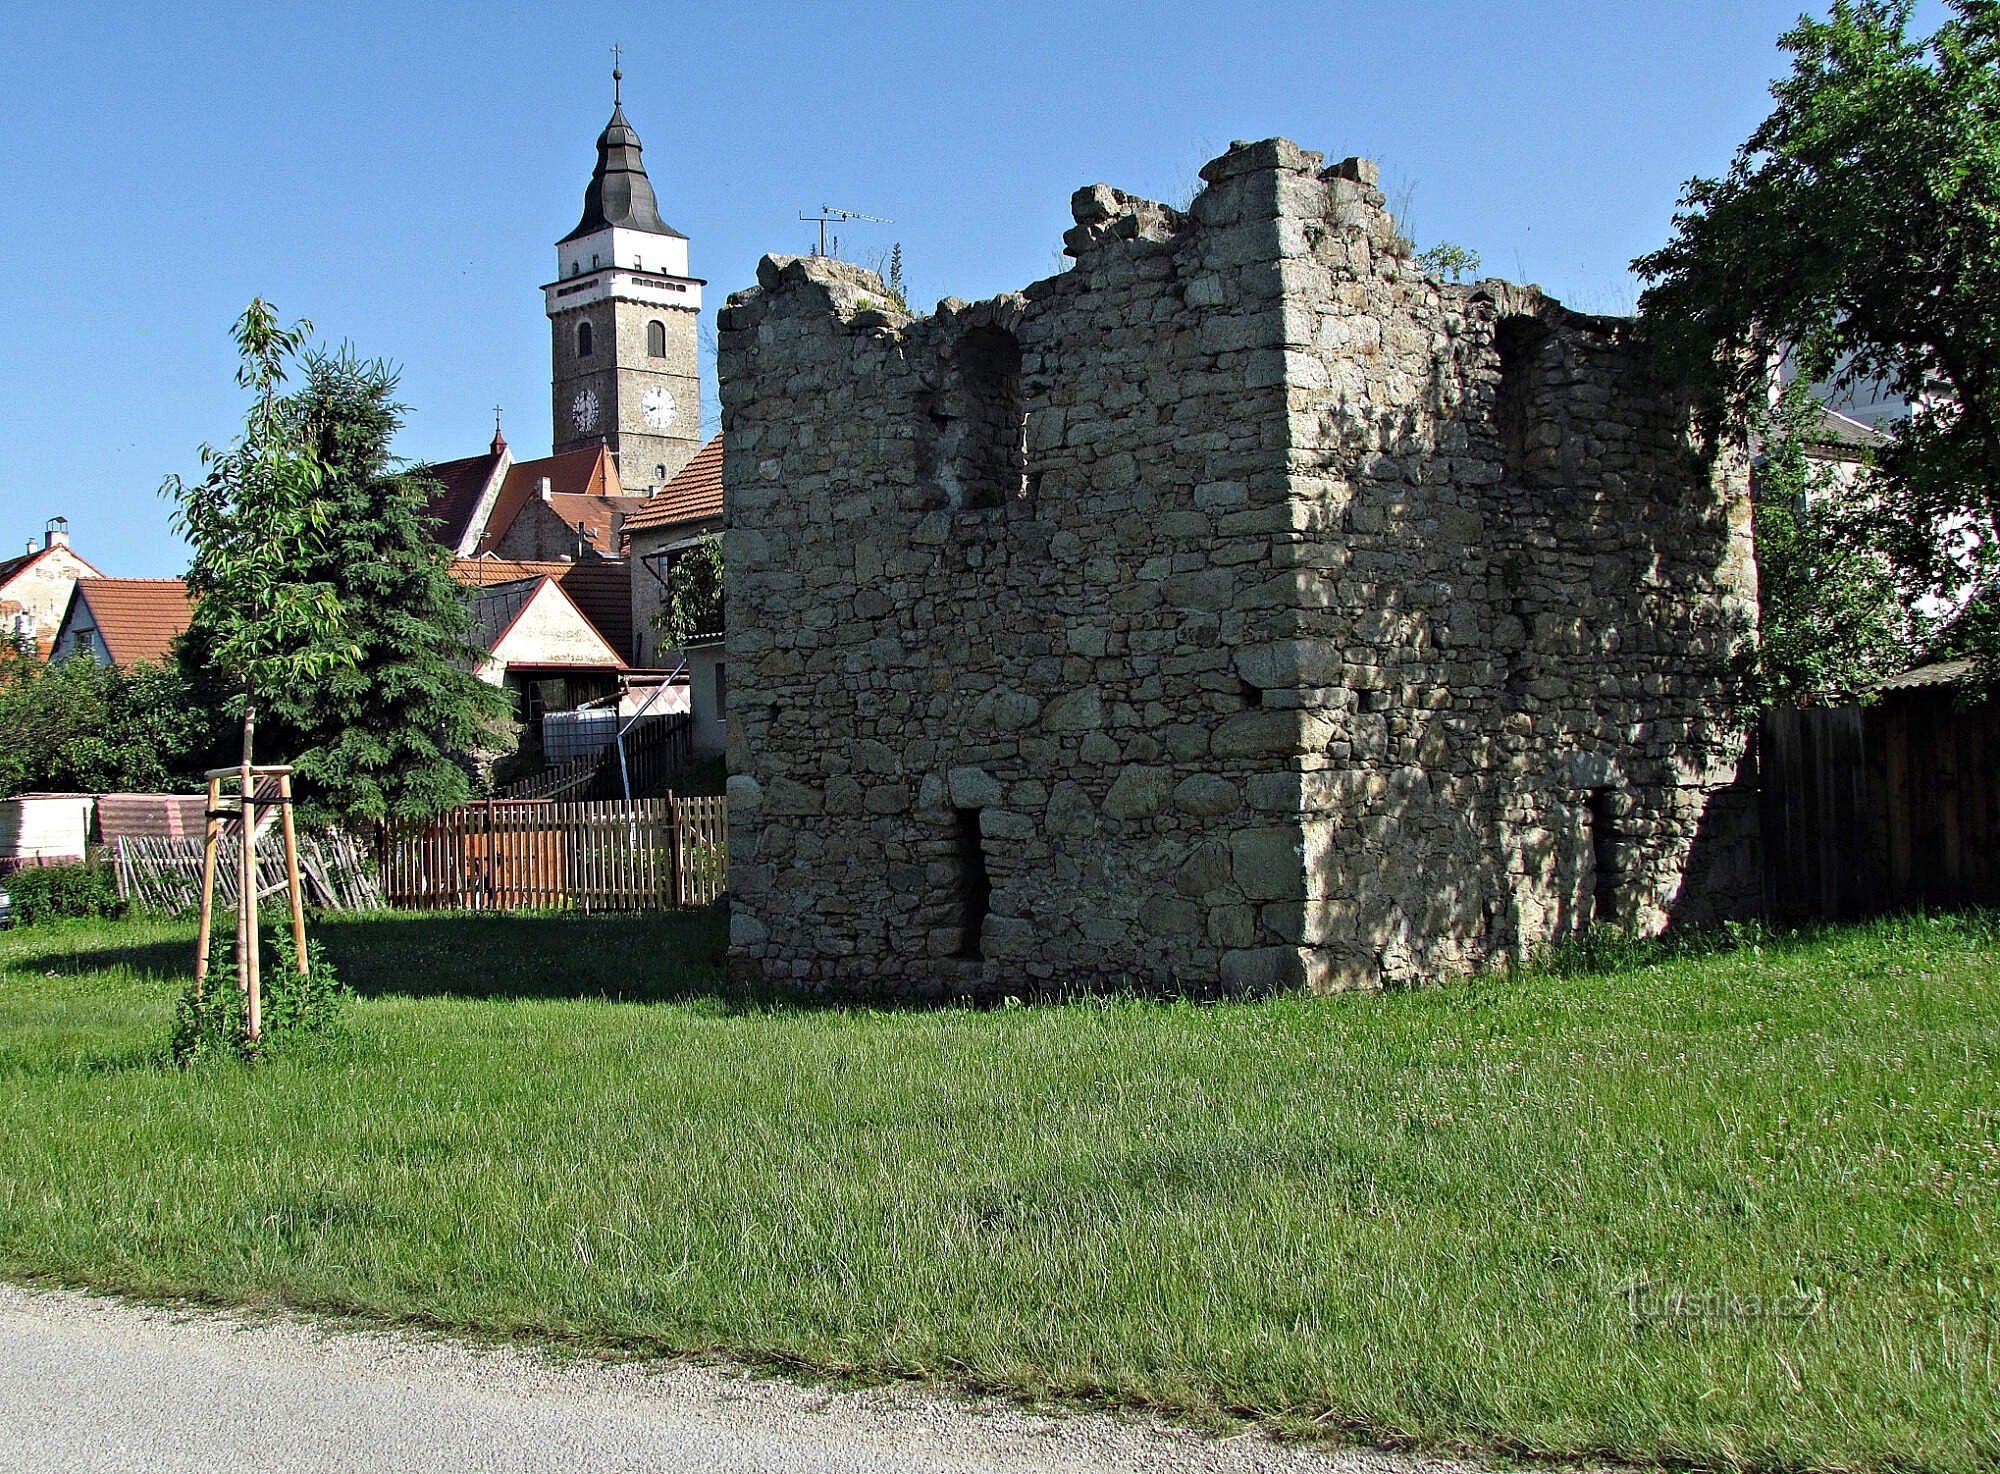 the remains of the fortifications on the eastern side of the city